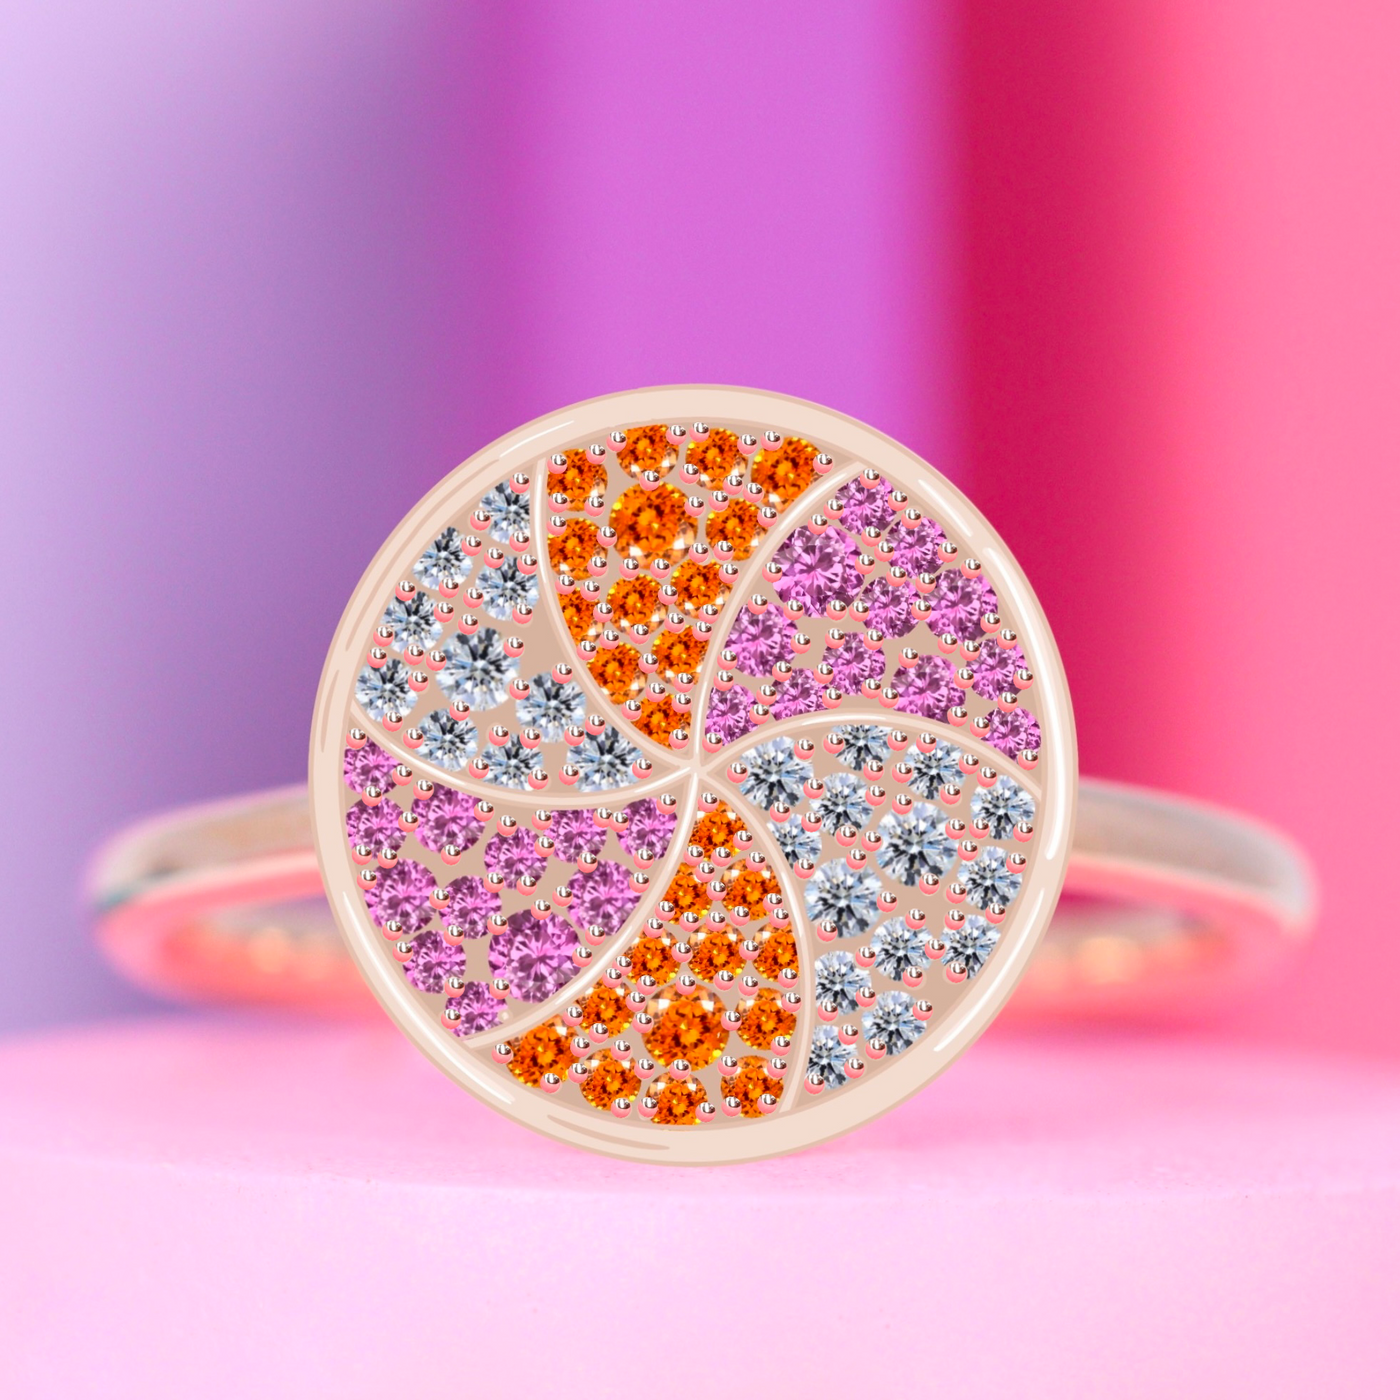 The Summer Soirée Ring - Pink and Orange Sapphire and White Diamond Engagement Ring - Custom Made-to-Order Design